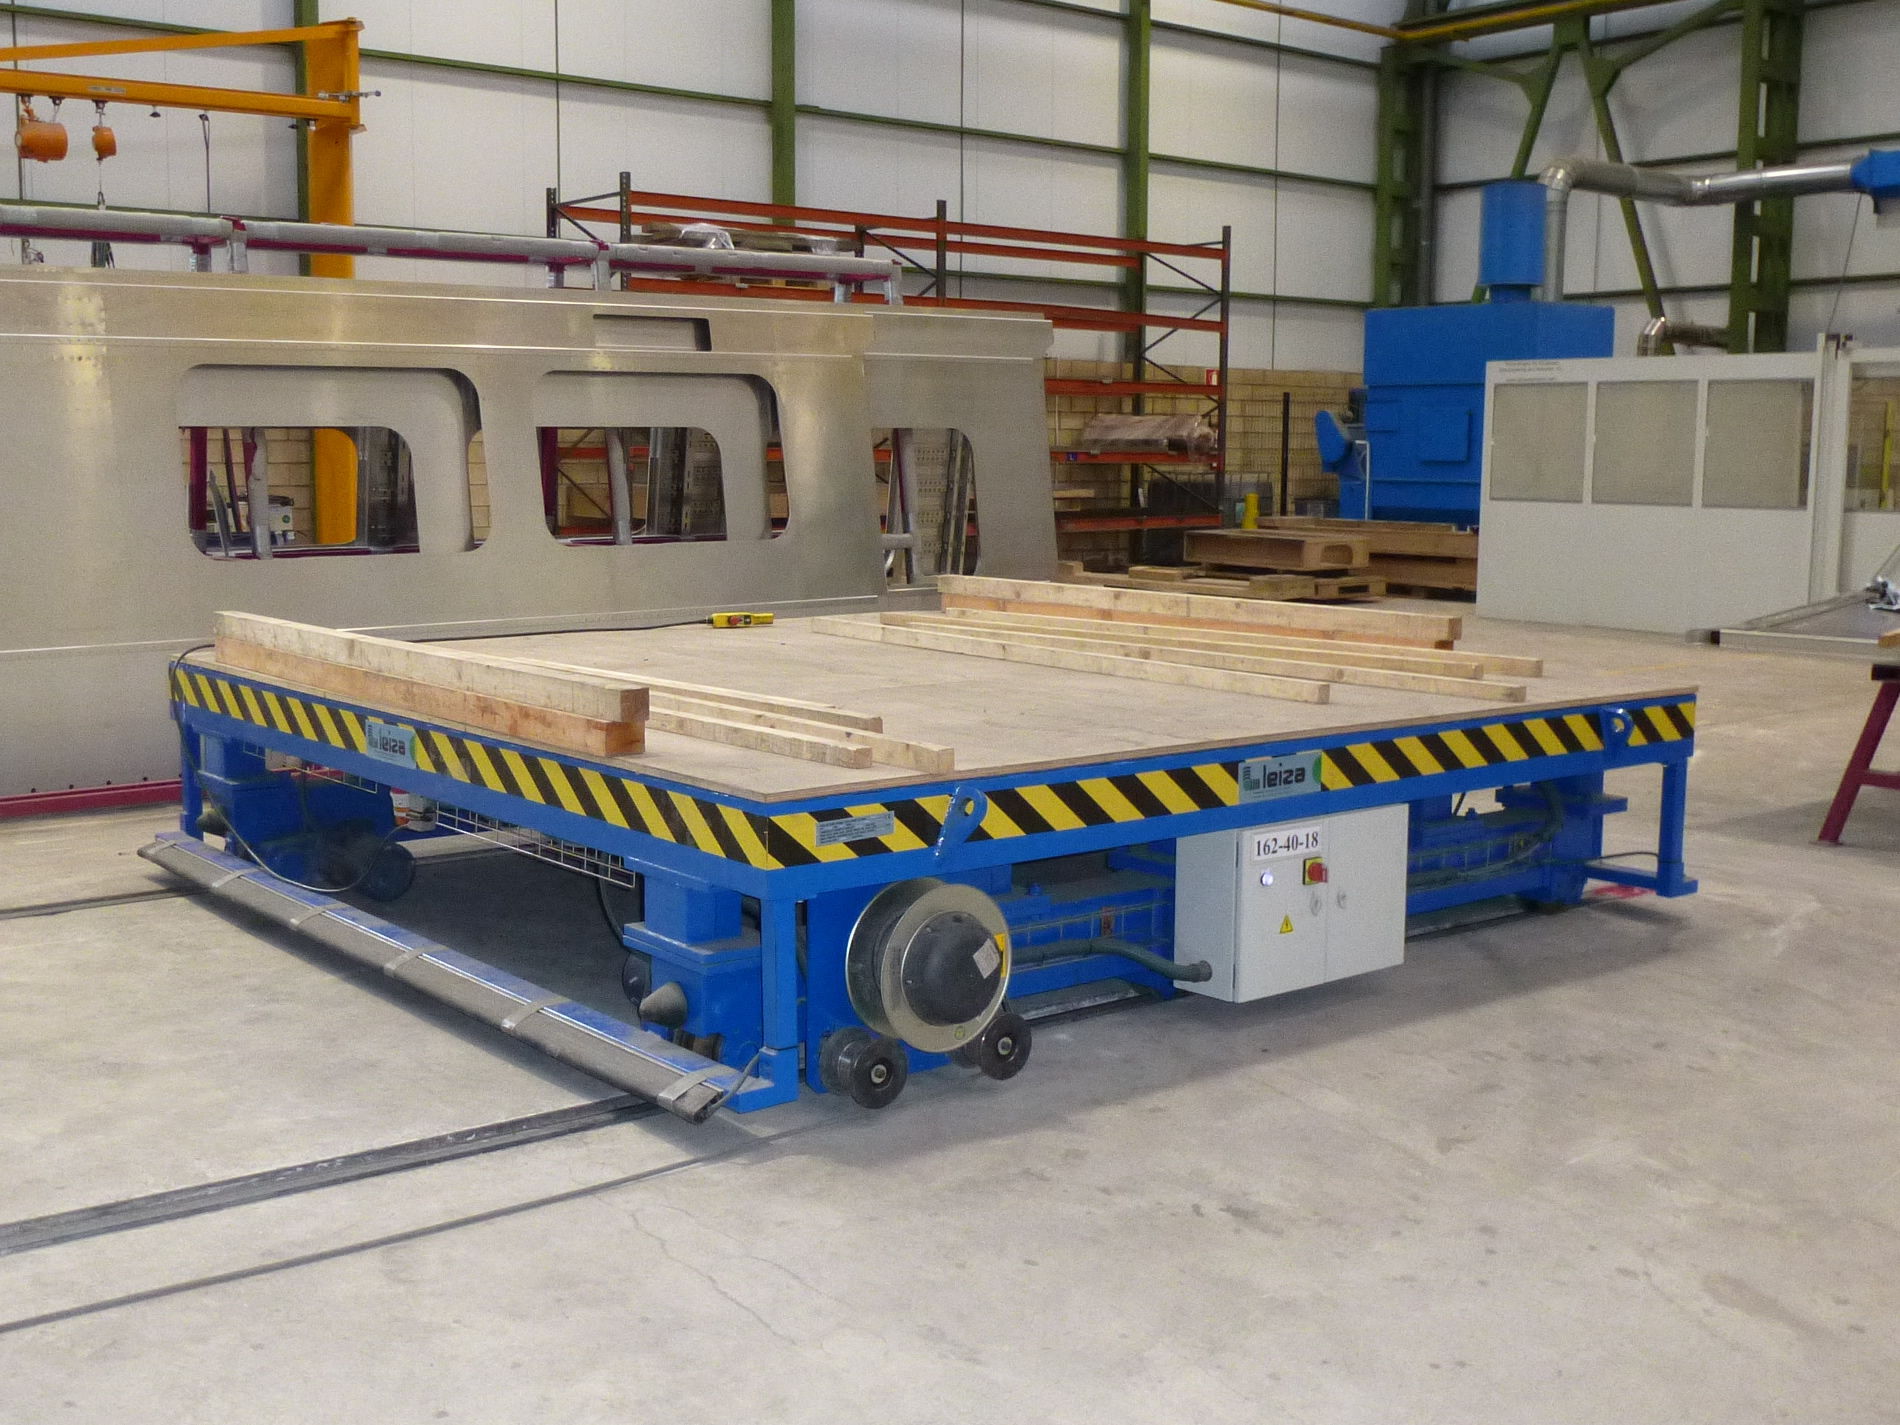 Bespoke manufacture of railed carriages without lifting mechanism for any industrial sector